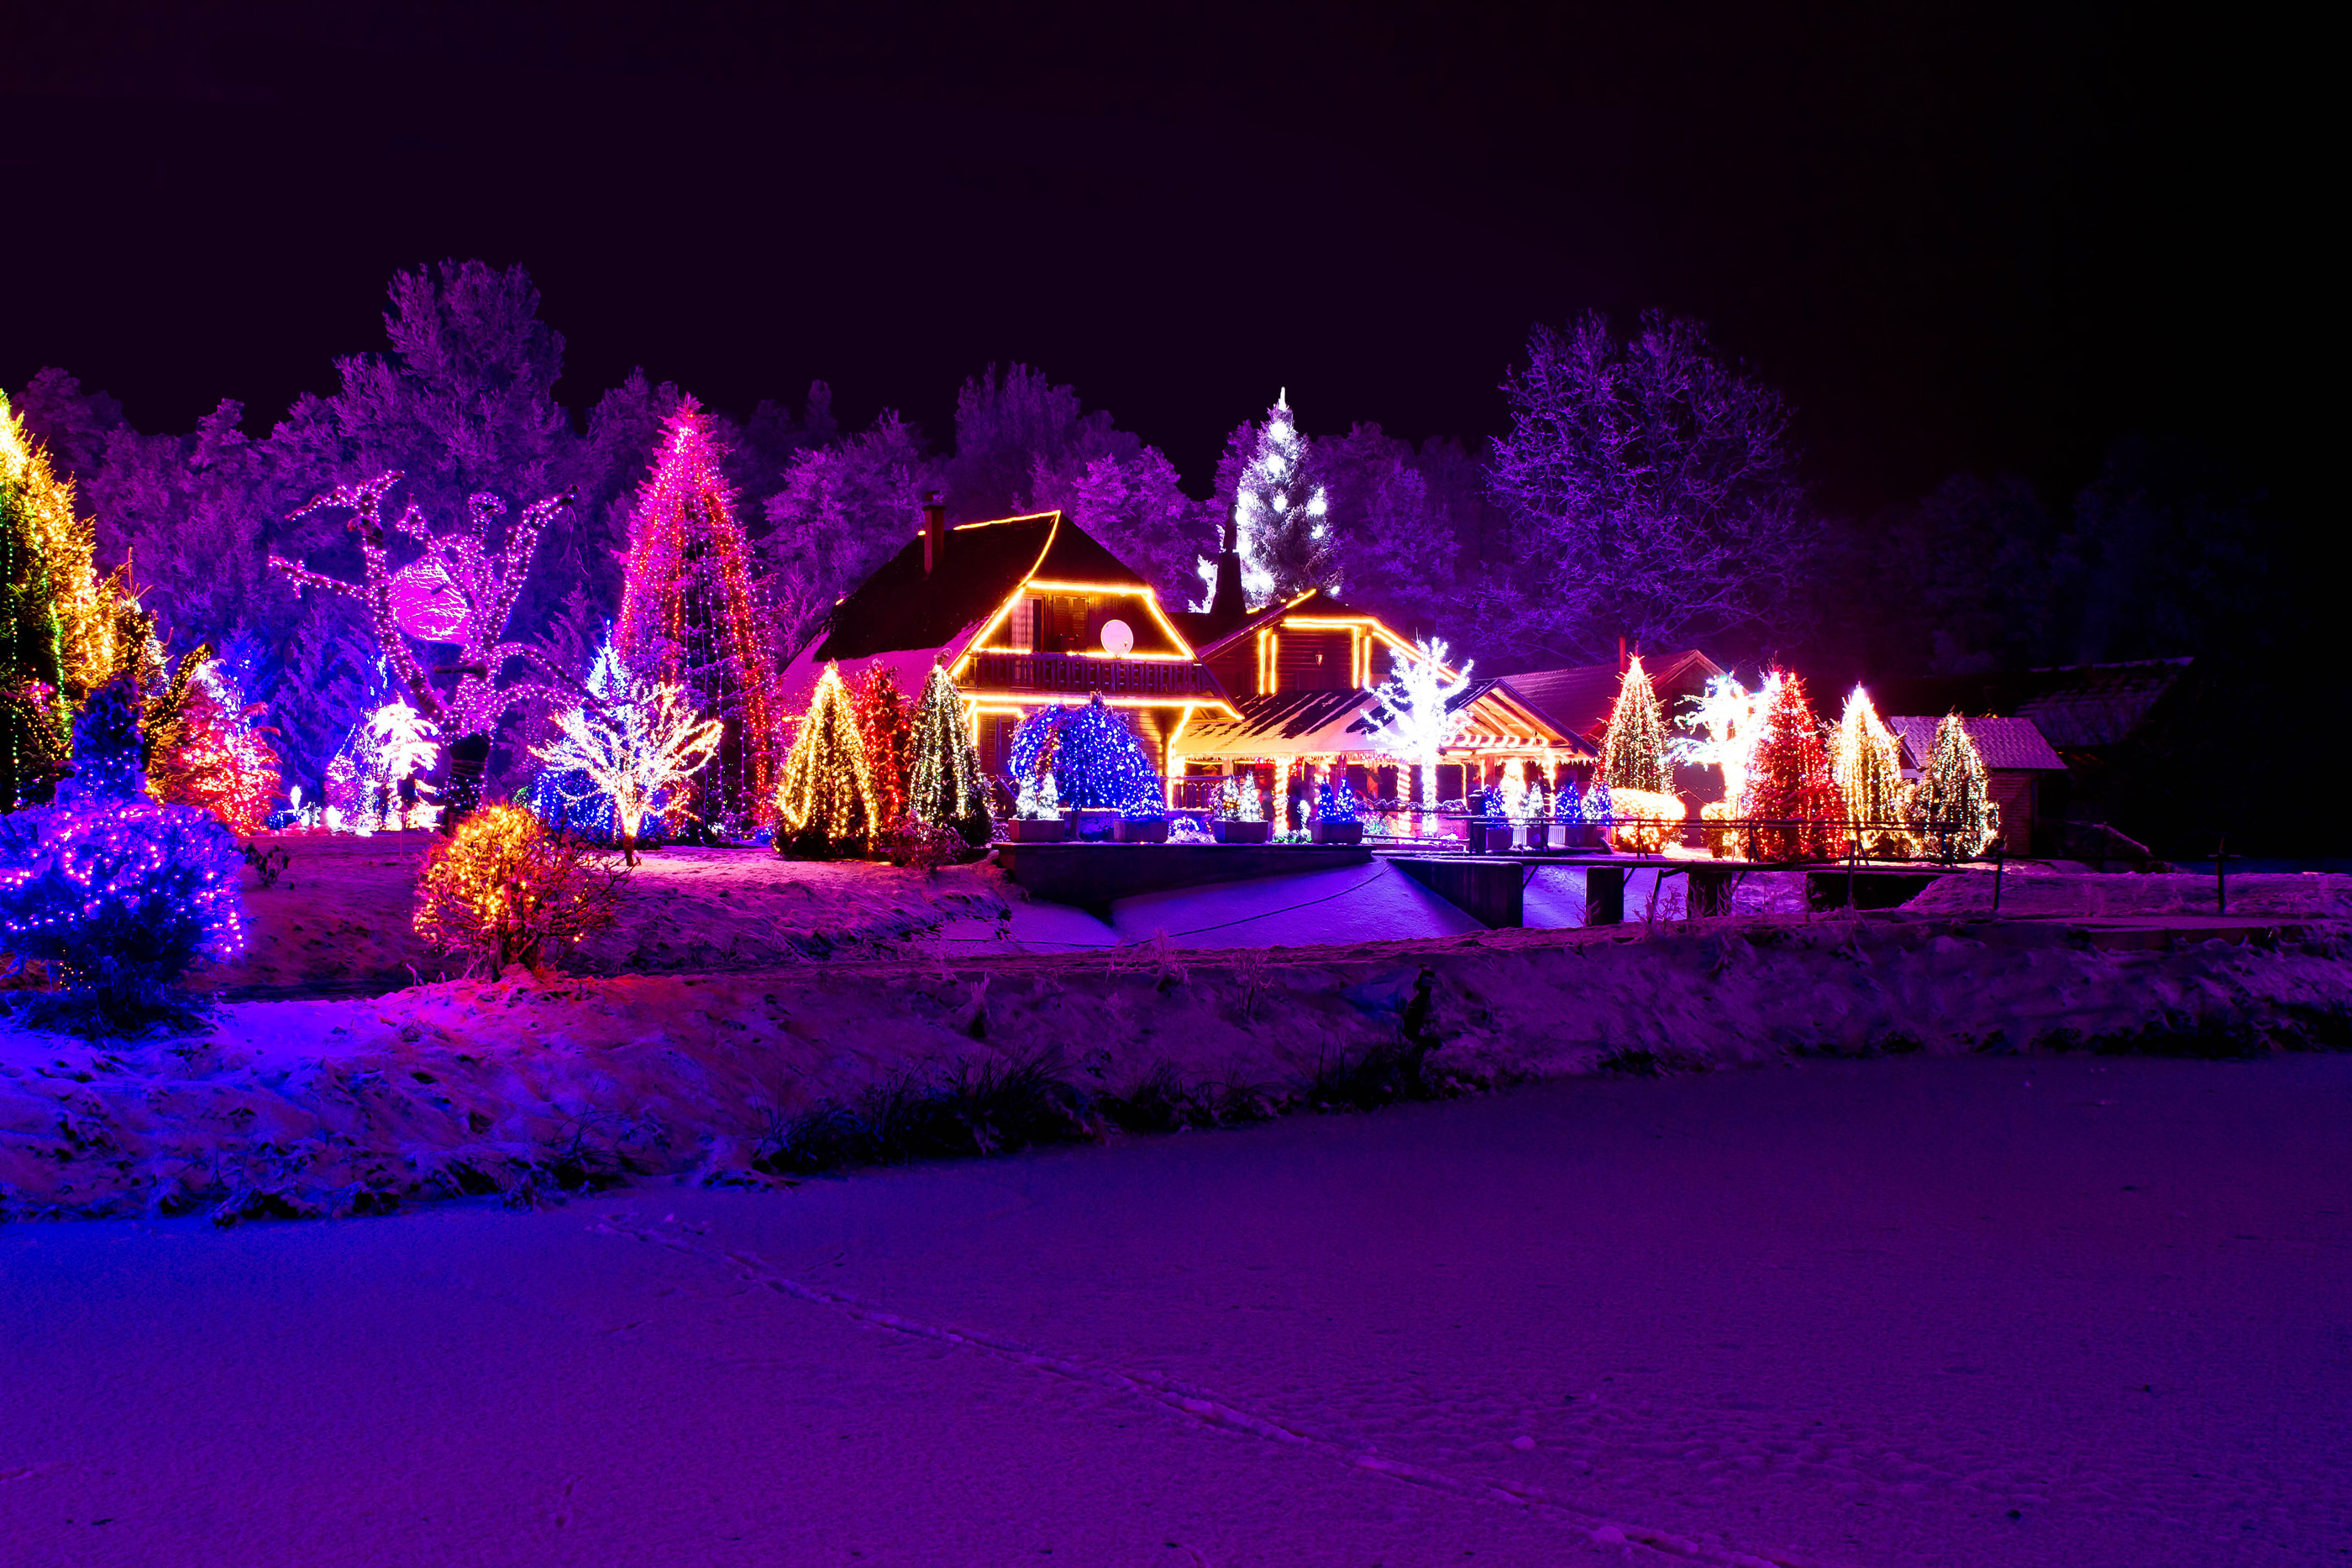 Christmas fantasy - park, forest & lodge in xmas lights